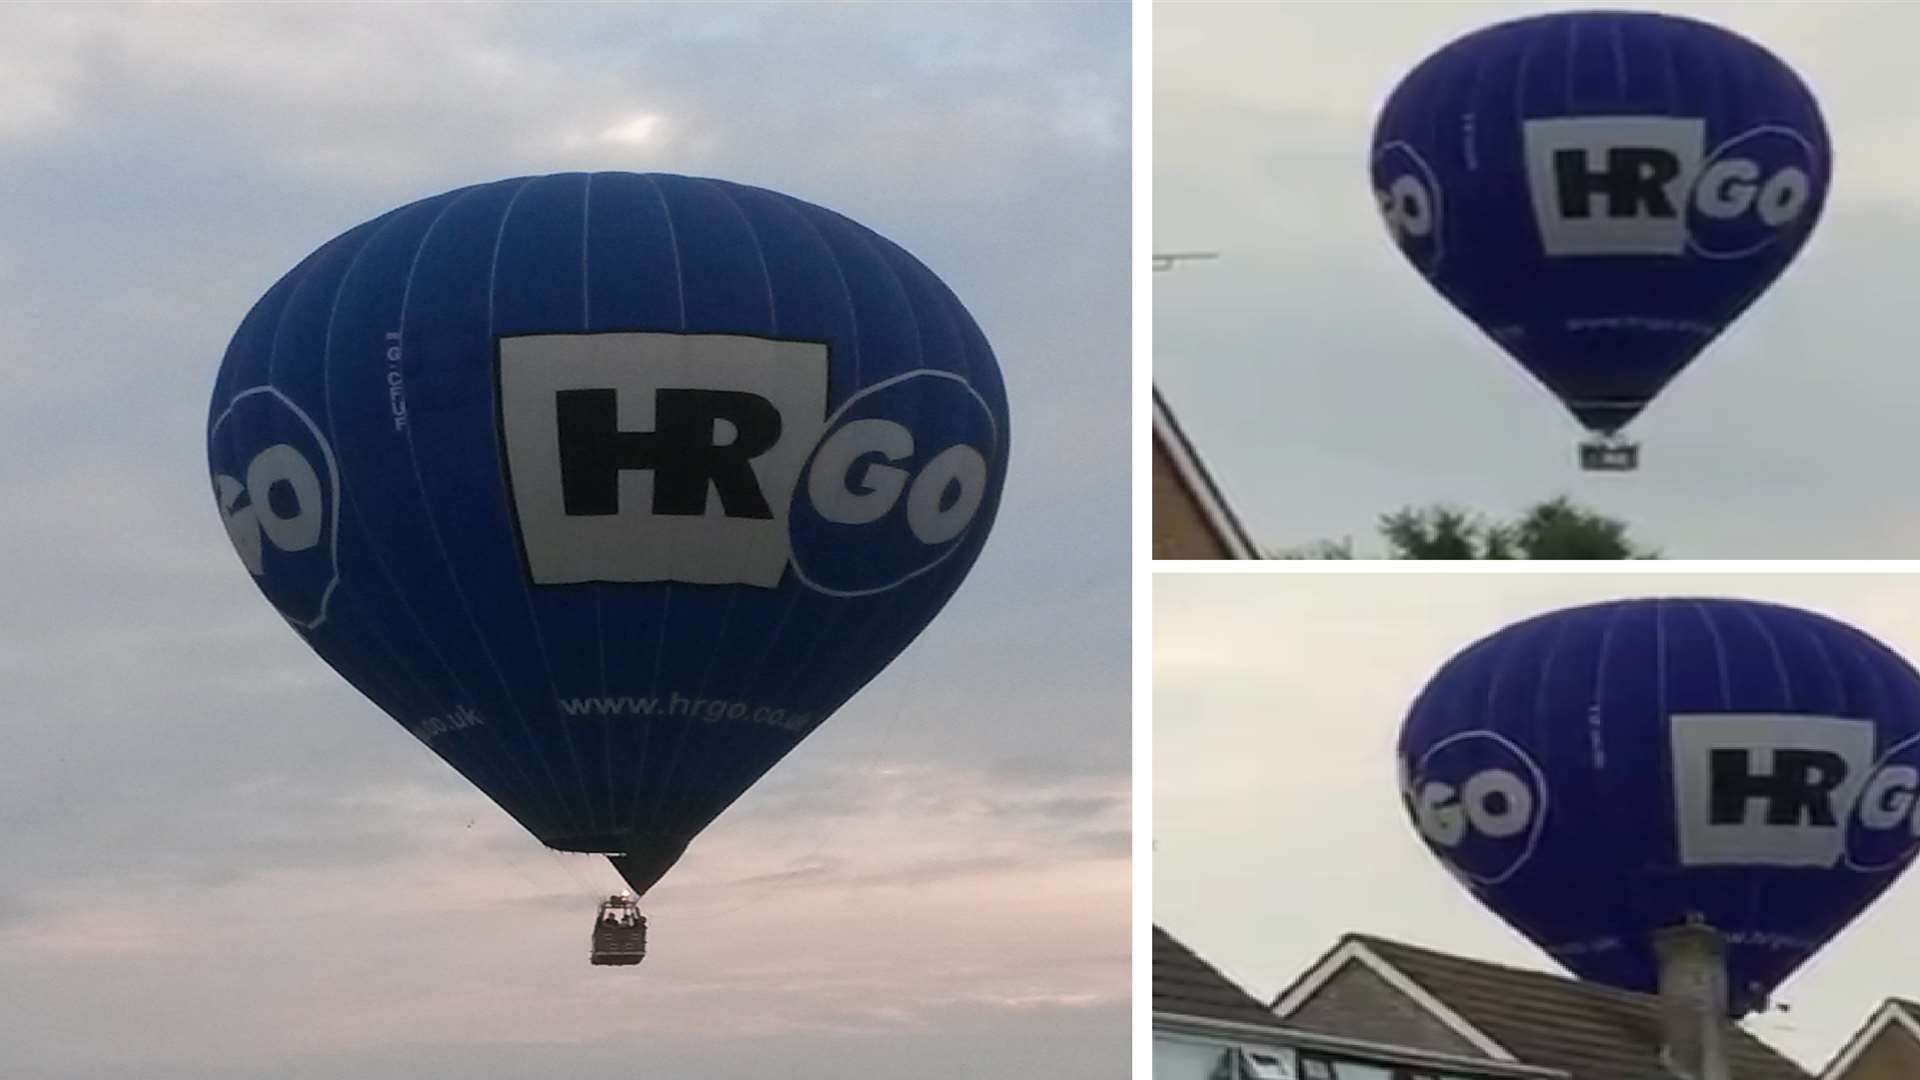 The balloon skimmed the rooftops in South Ashford. Pics by Alastair Irvine (left) and Jason Sanders (right)